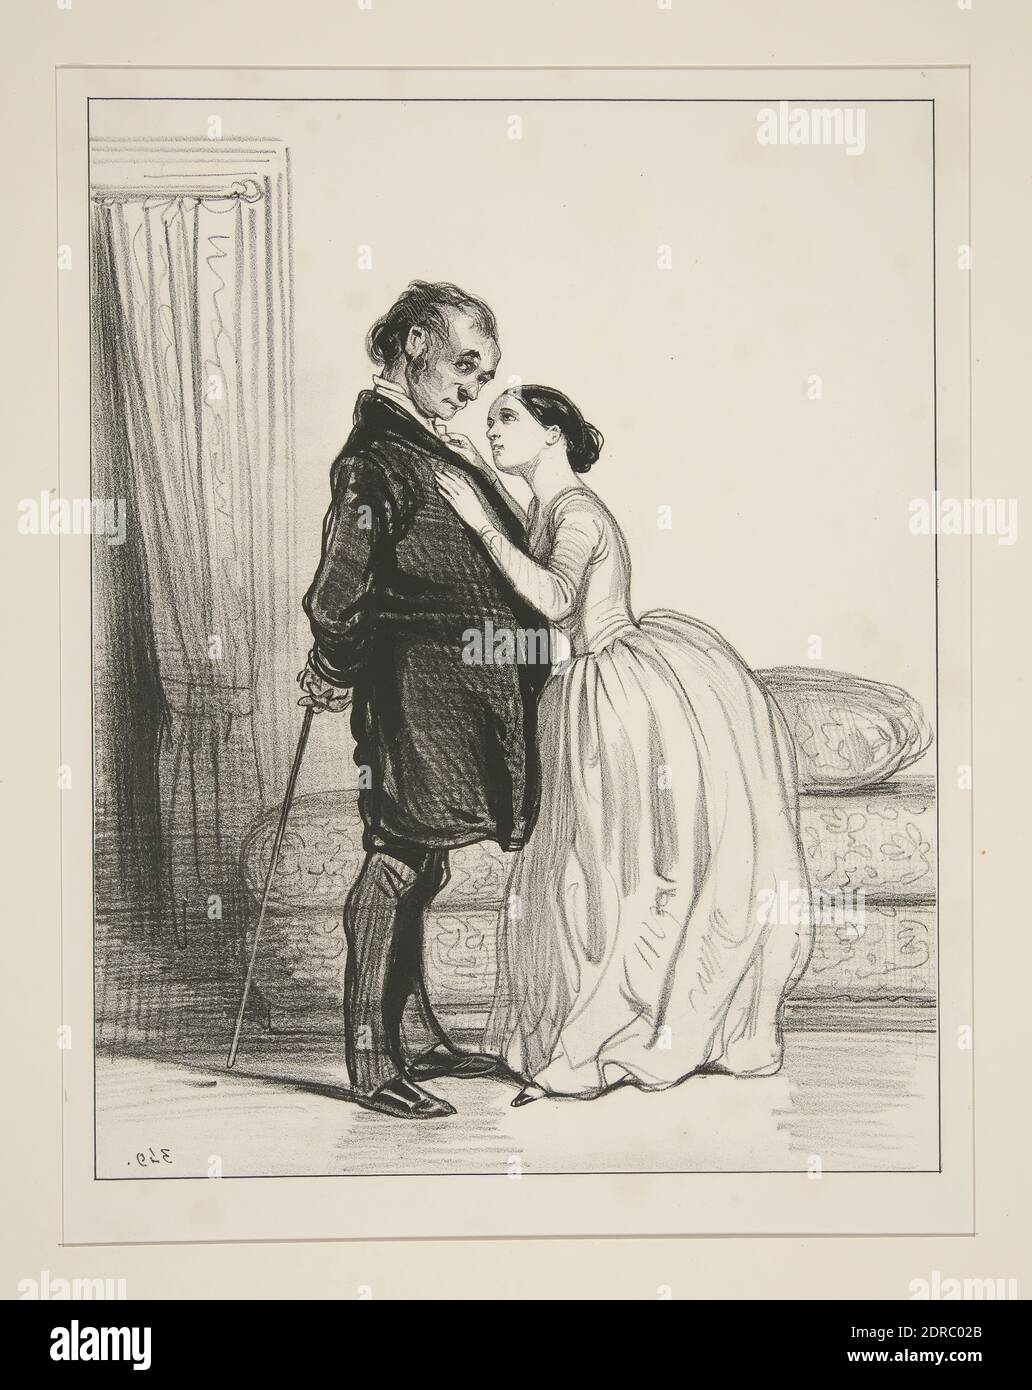 Artist: Paul Gavarni, French, 1804–1866, Voyons! Theodore! nous ne sommes…, Lithograph, French, 19th century, Works on Paper - Prints Stock Photo